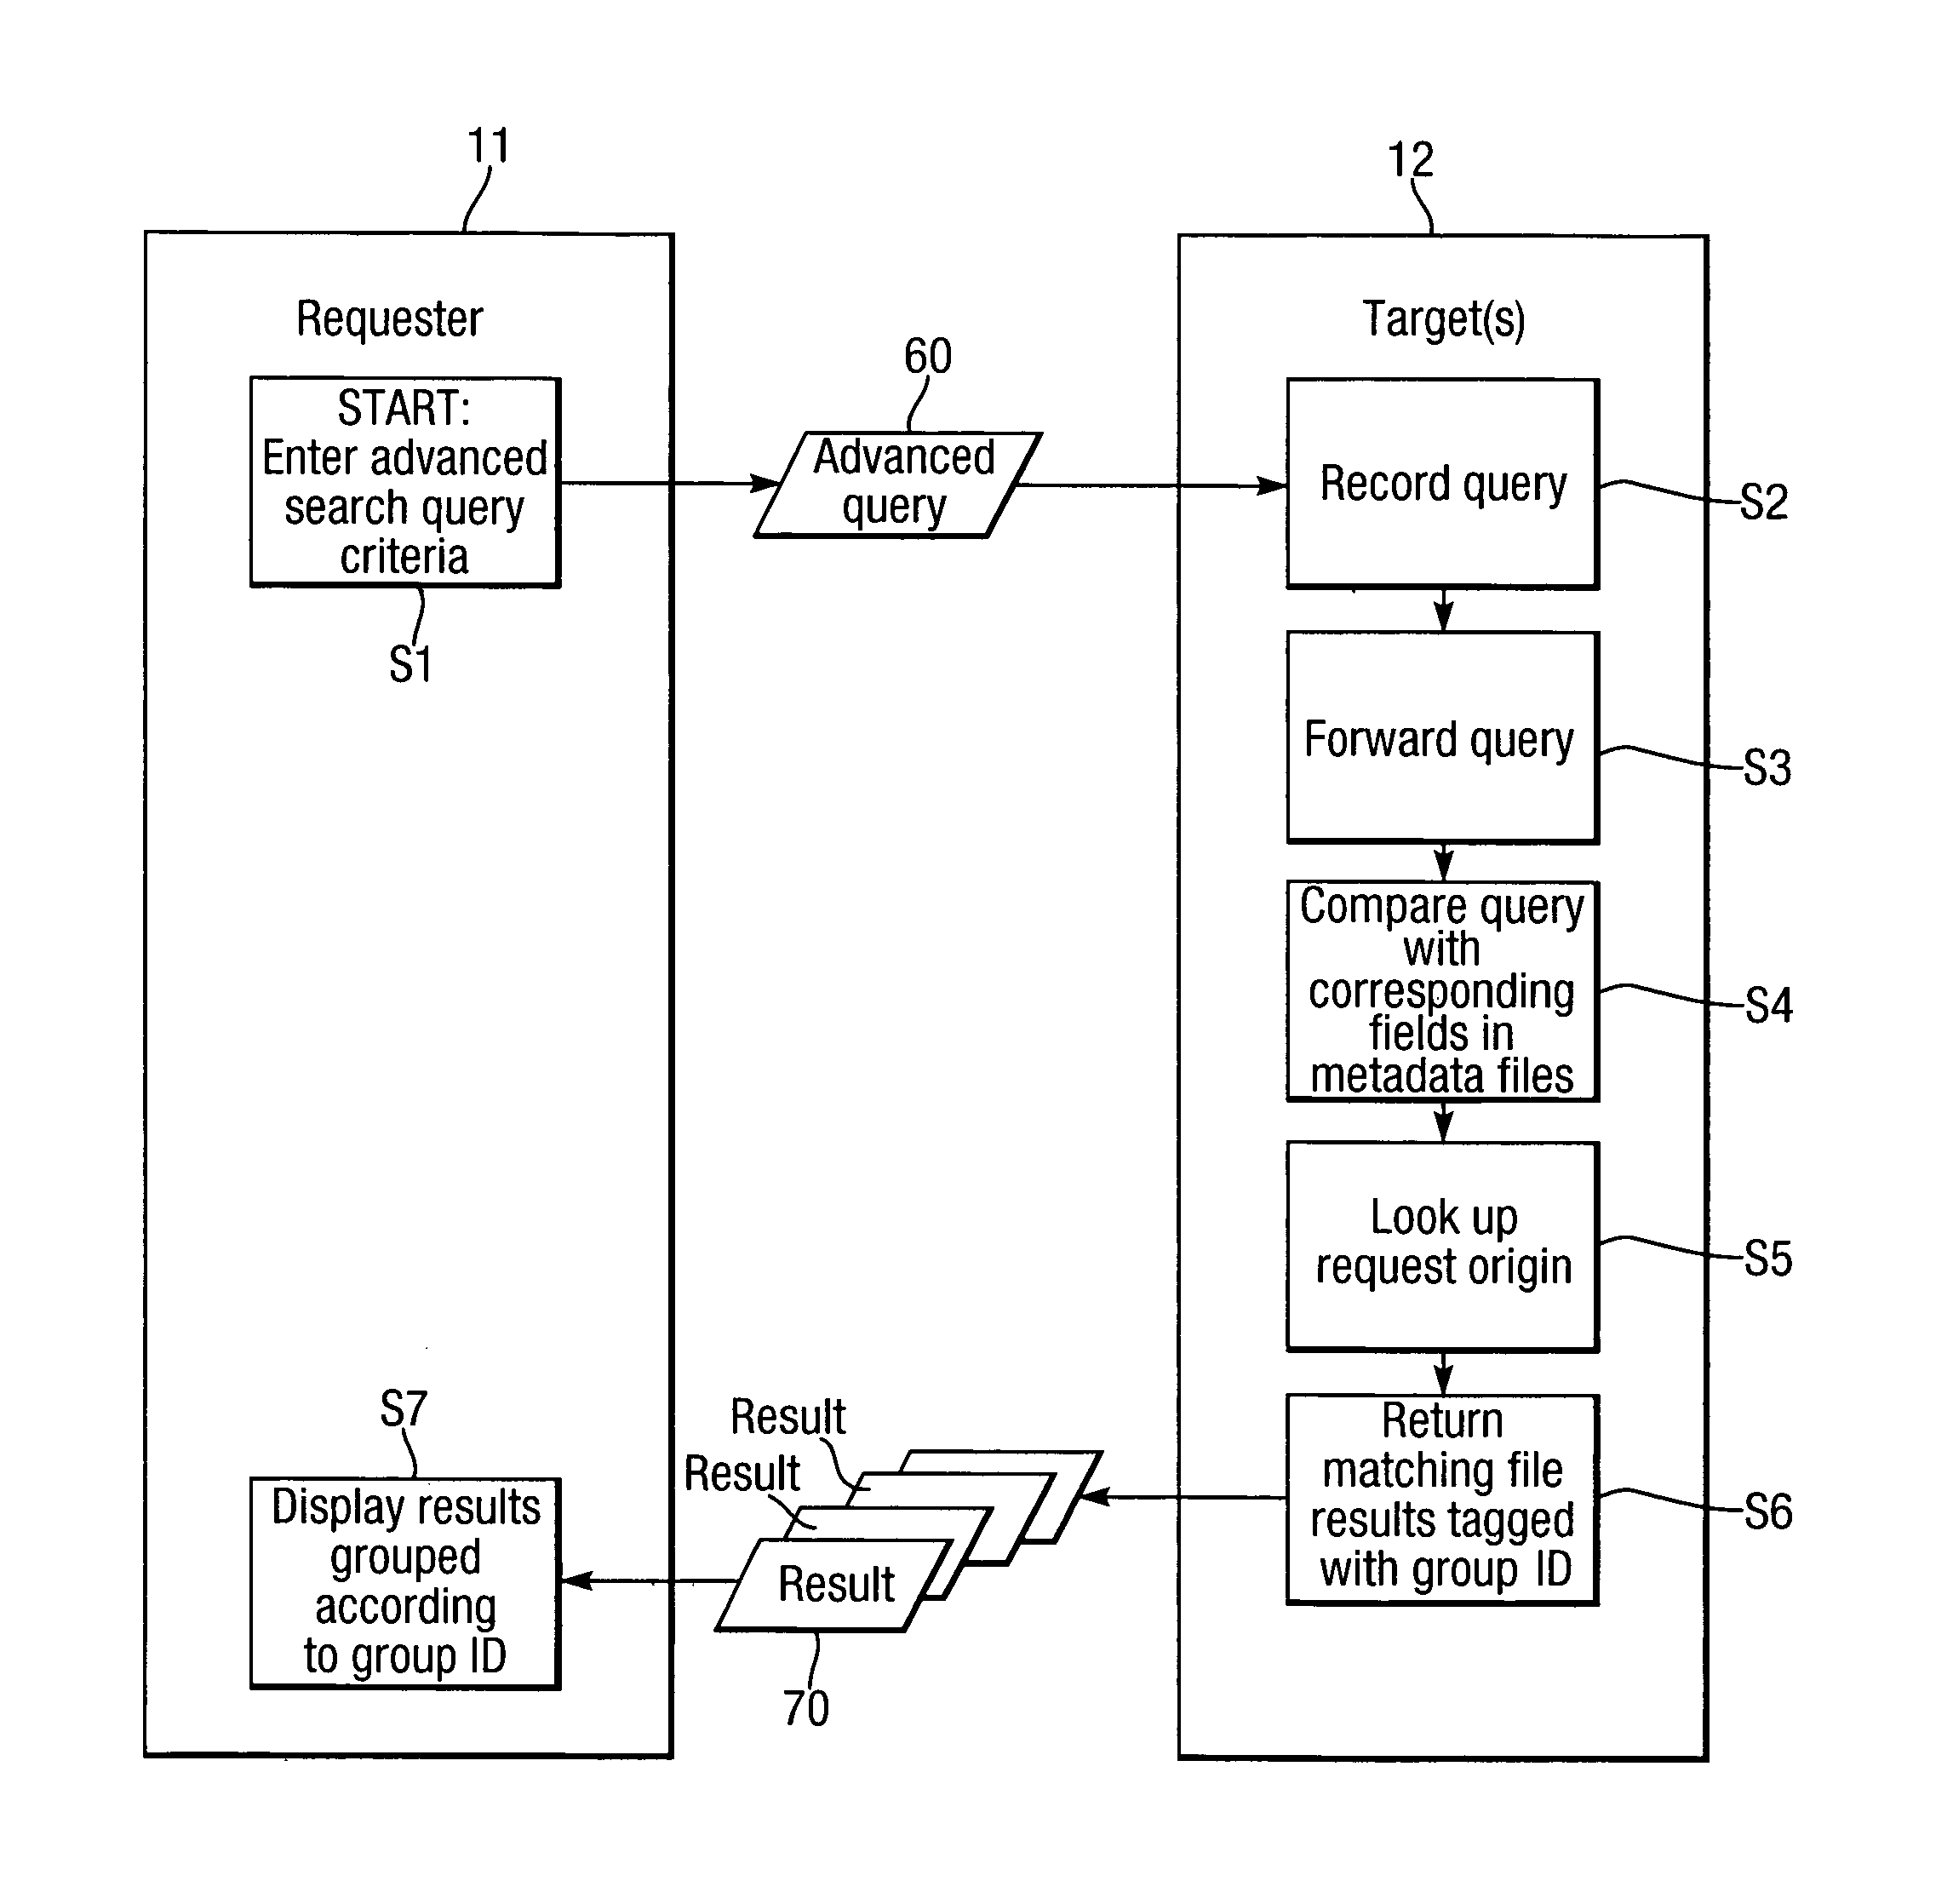 Storage of content data in a peer-to-peer network